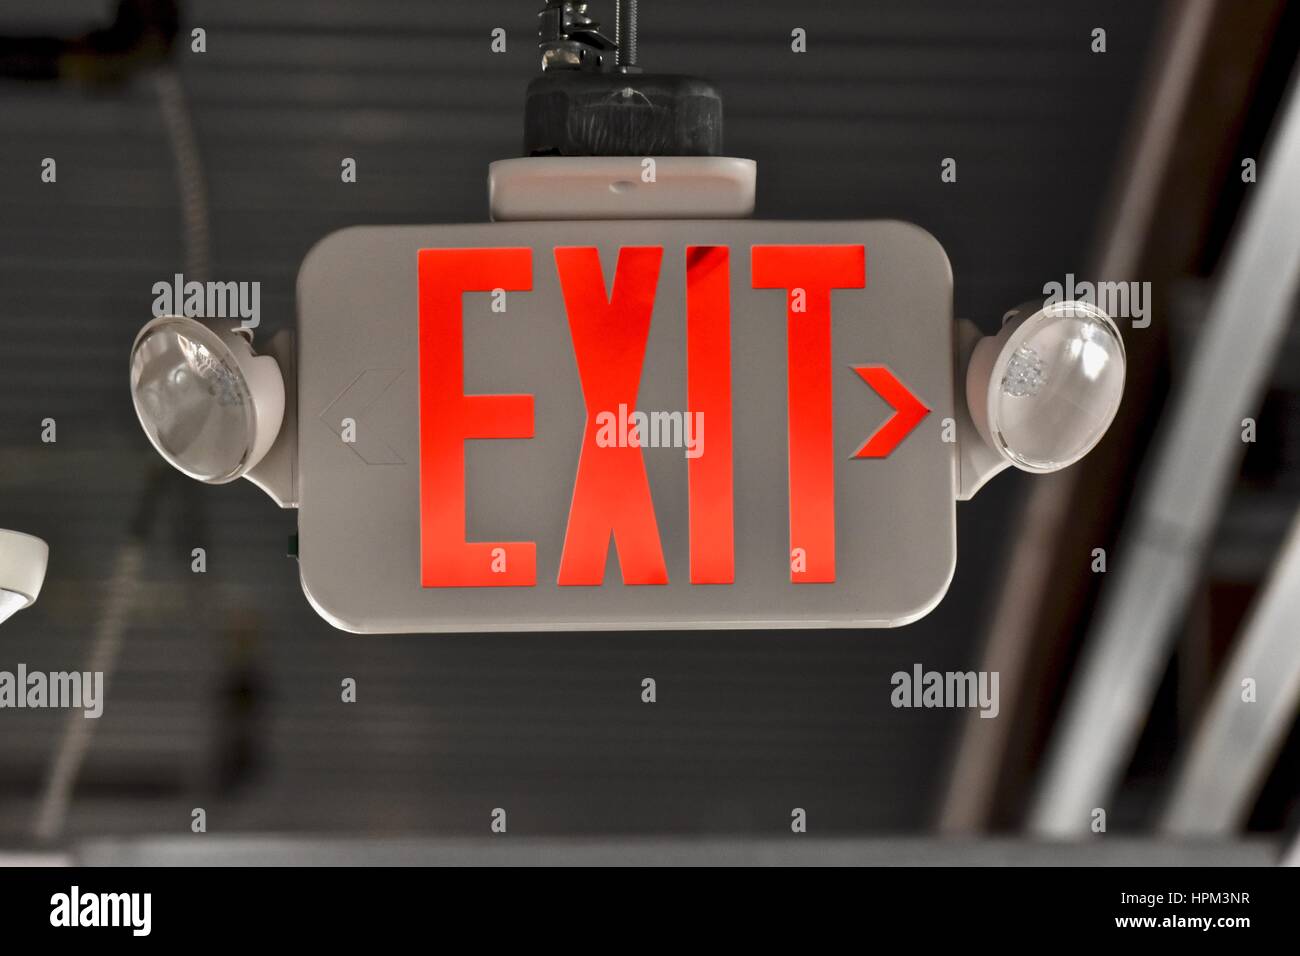 Emergency exit sign in hallway of building Stock Photo